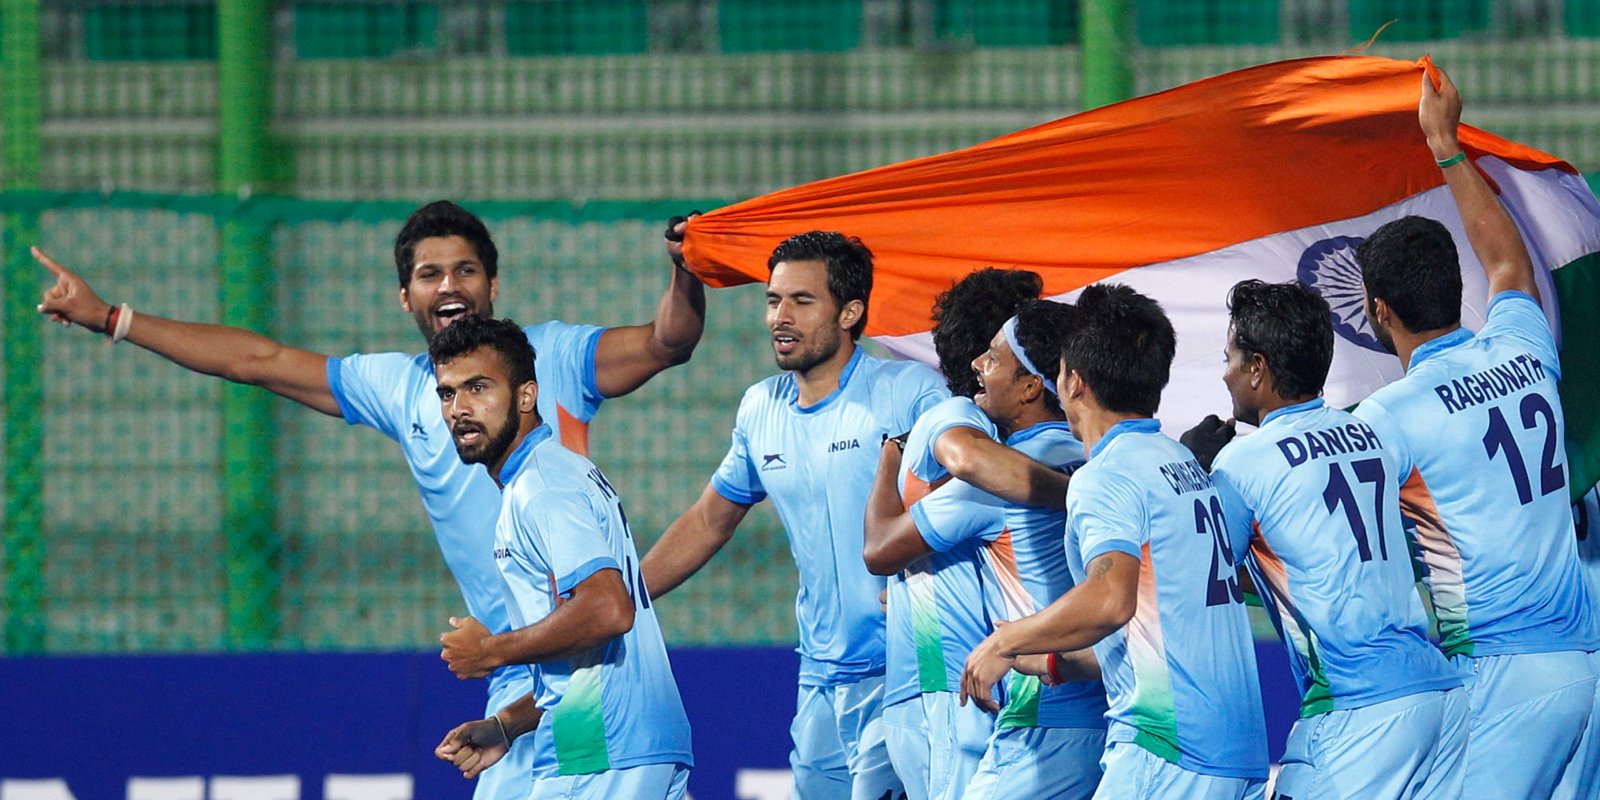 India will Face Germany in Champions Trophy on June 10